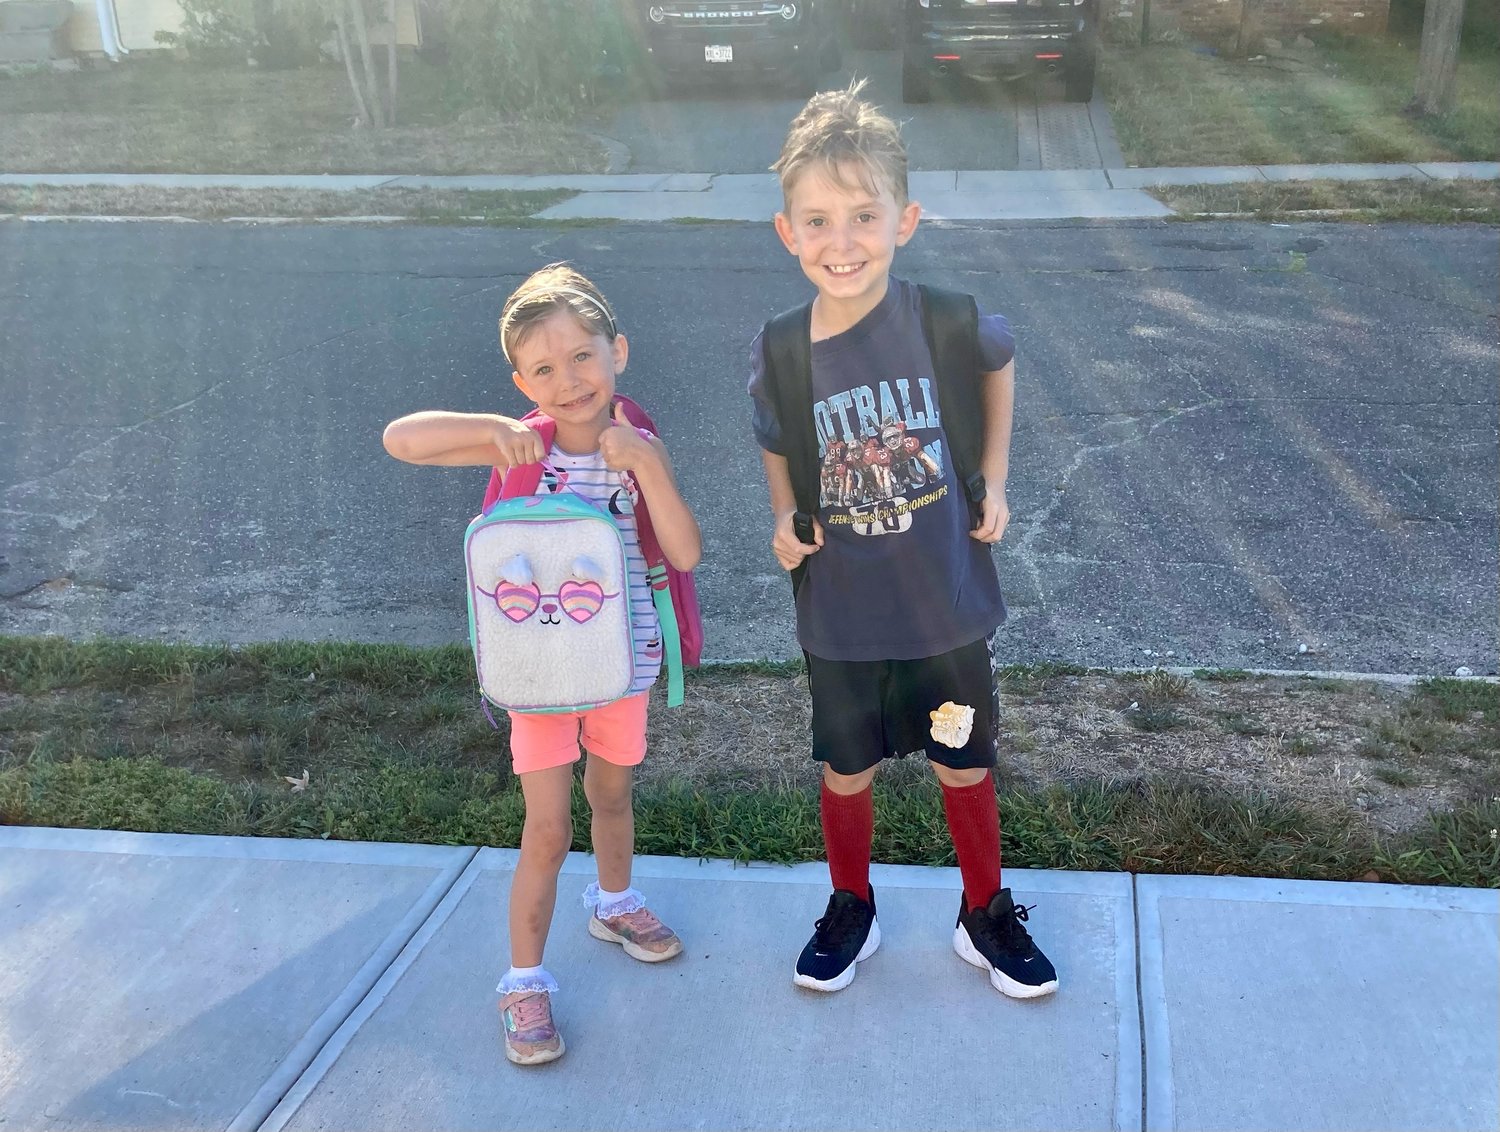 Avery Welsh, 5, made her way to kindergarten while her brother Finn, 9, ventured to fifth grade on Sept. 2. The siblings’ older brothers — not pictured — Brandon, 12, and Liam, 14, were off to eighth and ninth grade, respectively.